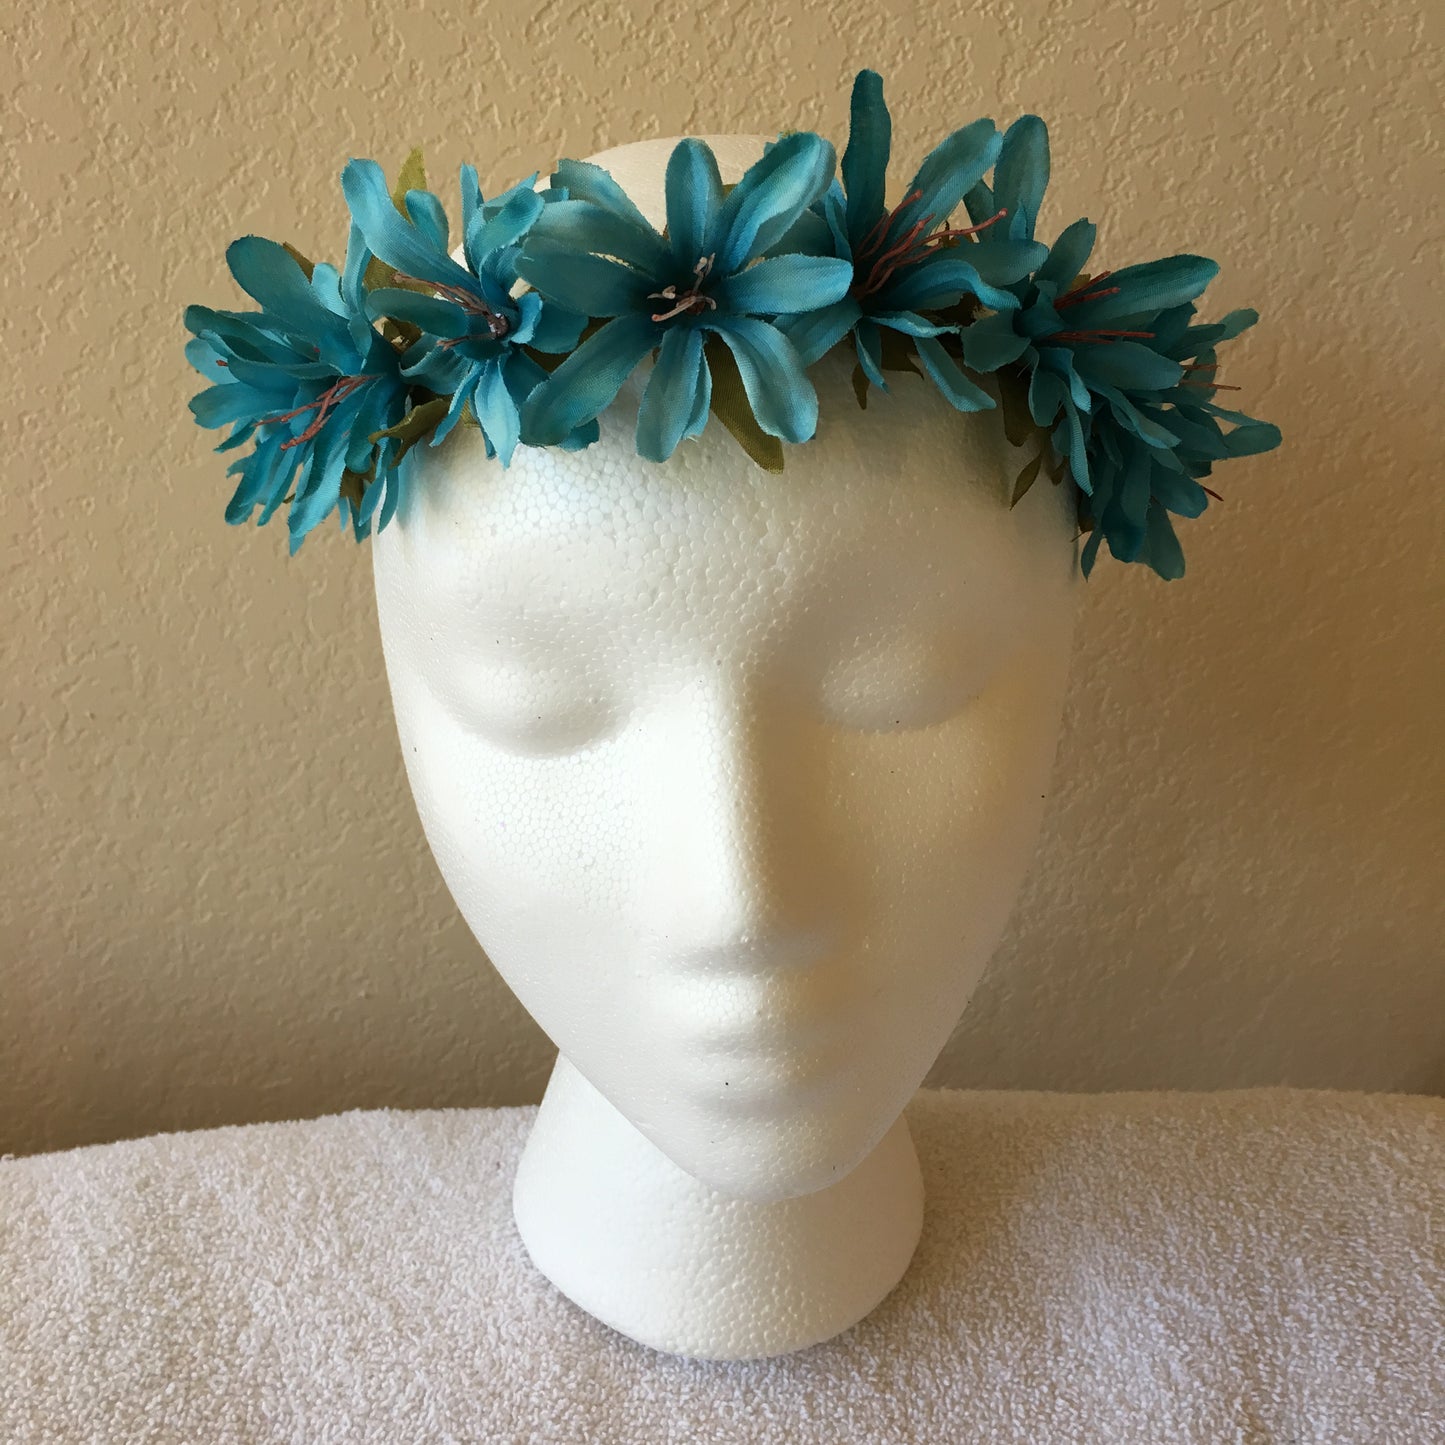 Extra Small Wreath - All teal spiky flowers +